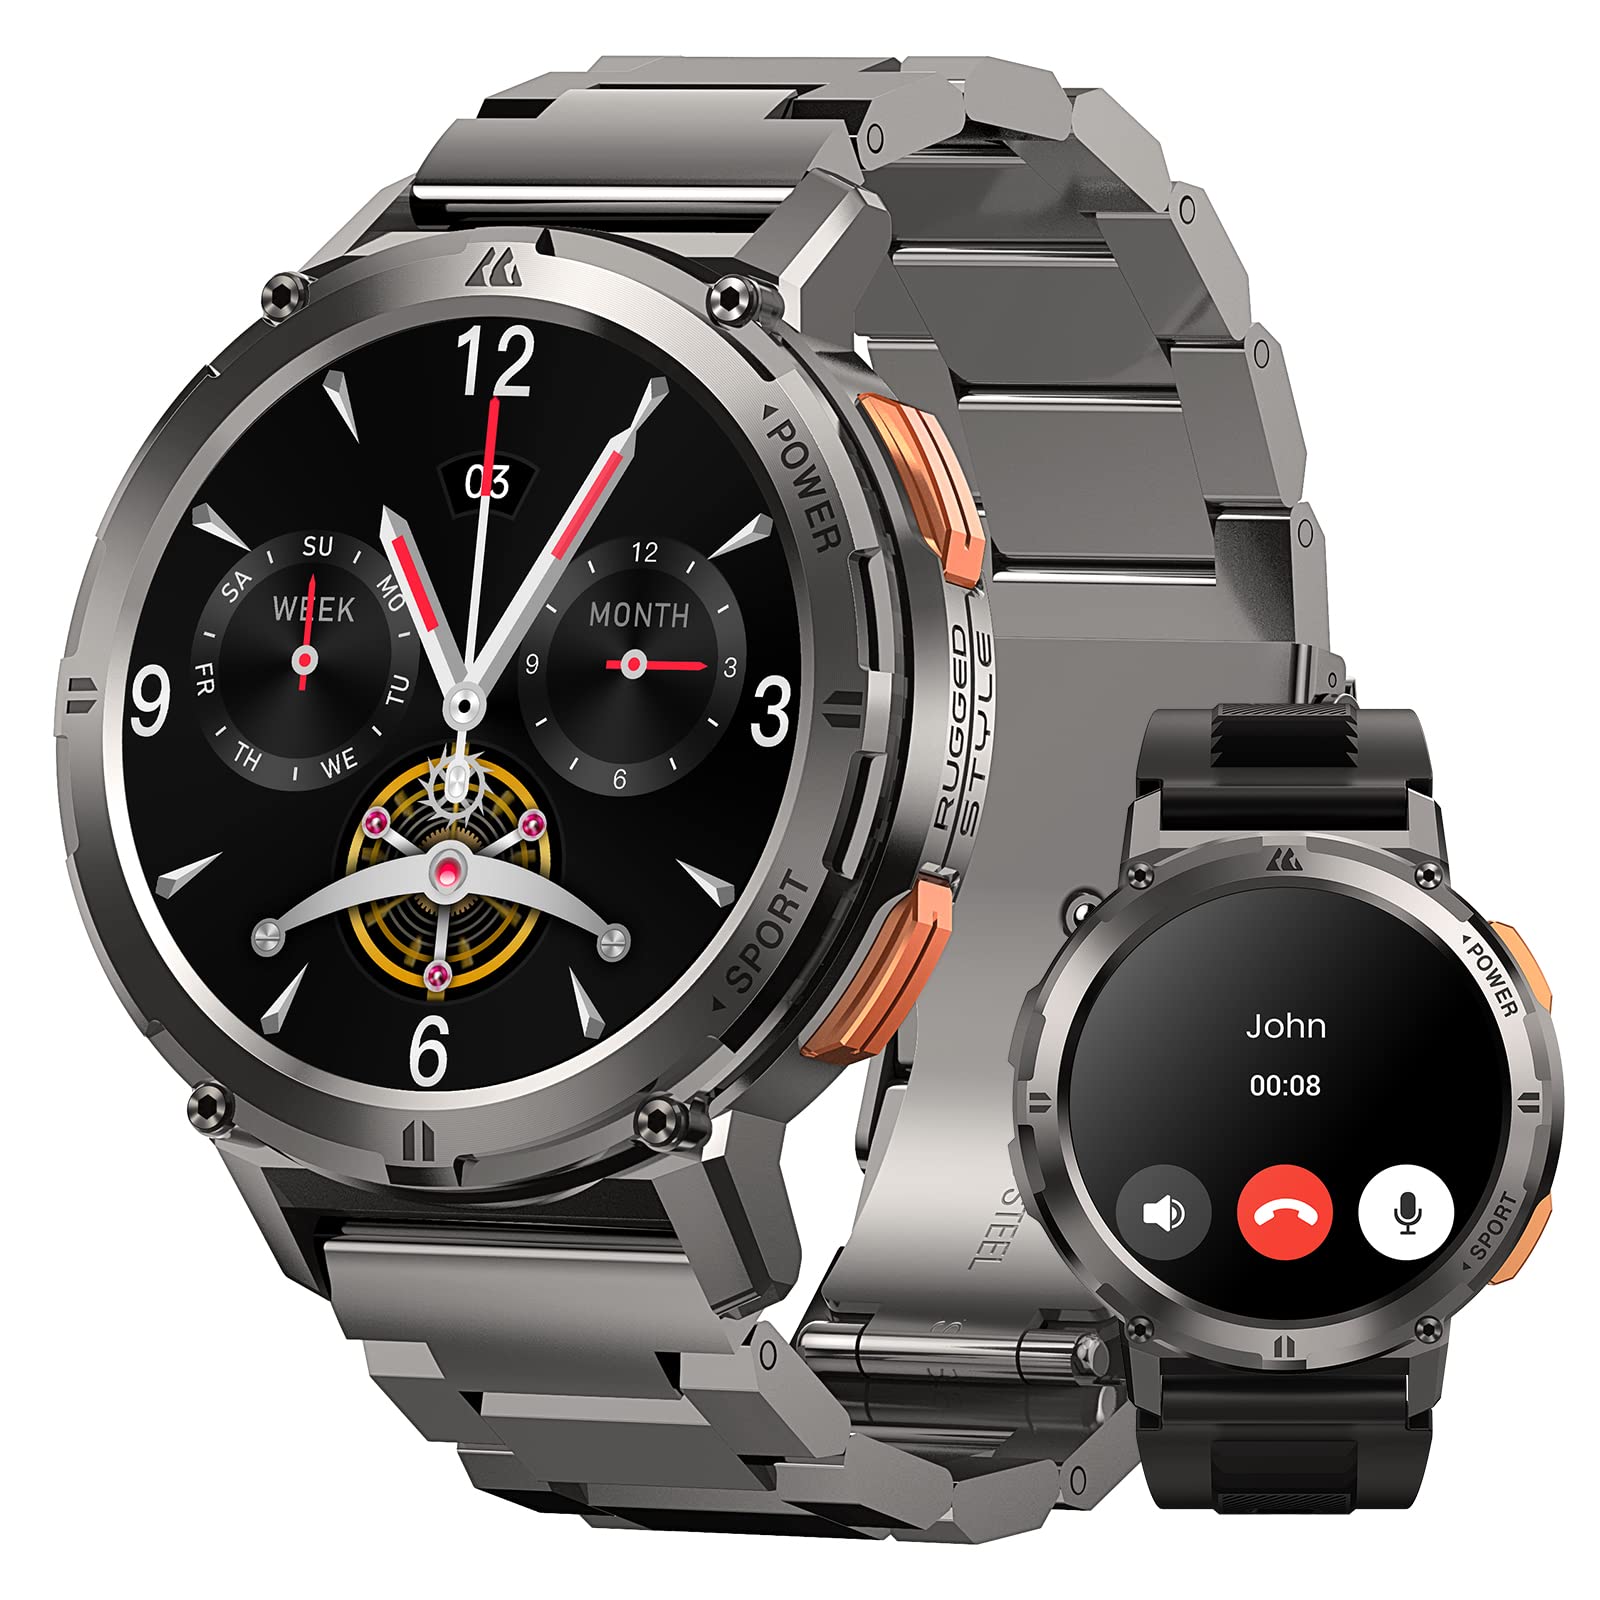 KOSPET Smart Watch AMOLED Display ???? ???????????????????? (????????????????????+????????????????????????) 60 Days Ultra-Long Battery Life (Call Receive/Dial) 70 Sports Modes 5ATM/IP69K Waterproof Smartwatches for Android iPhone